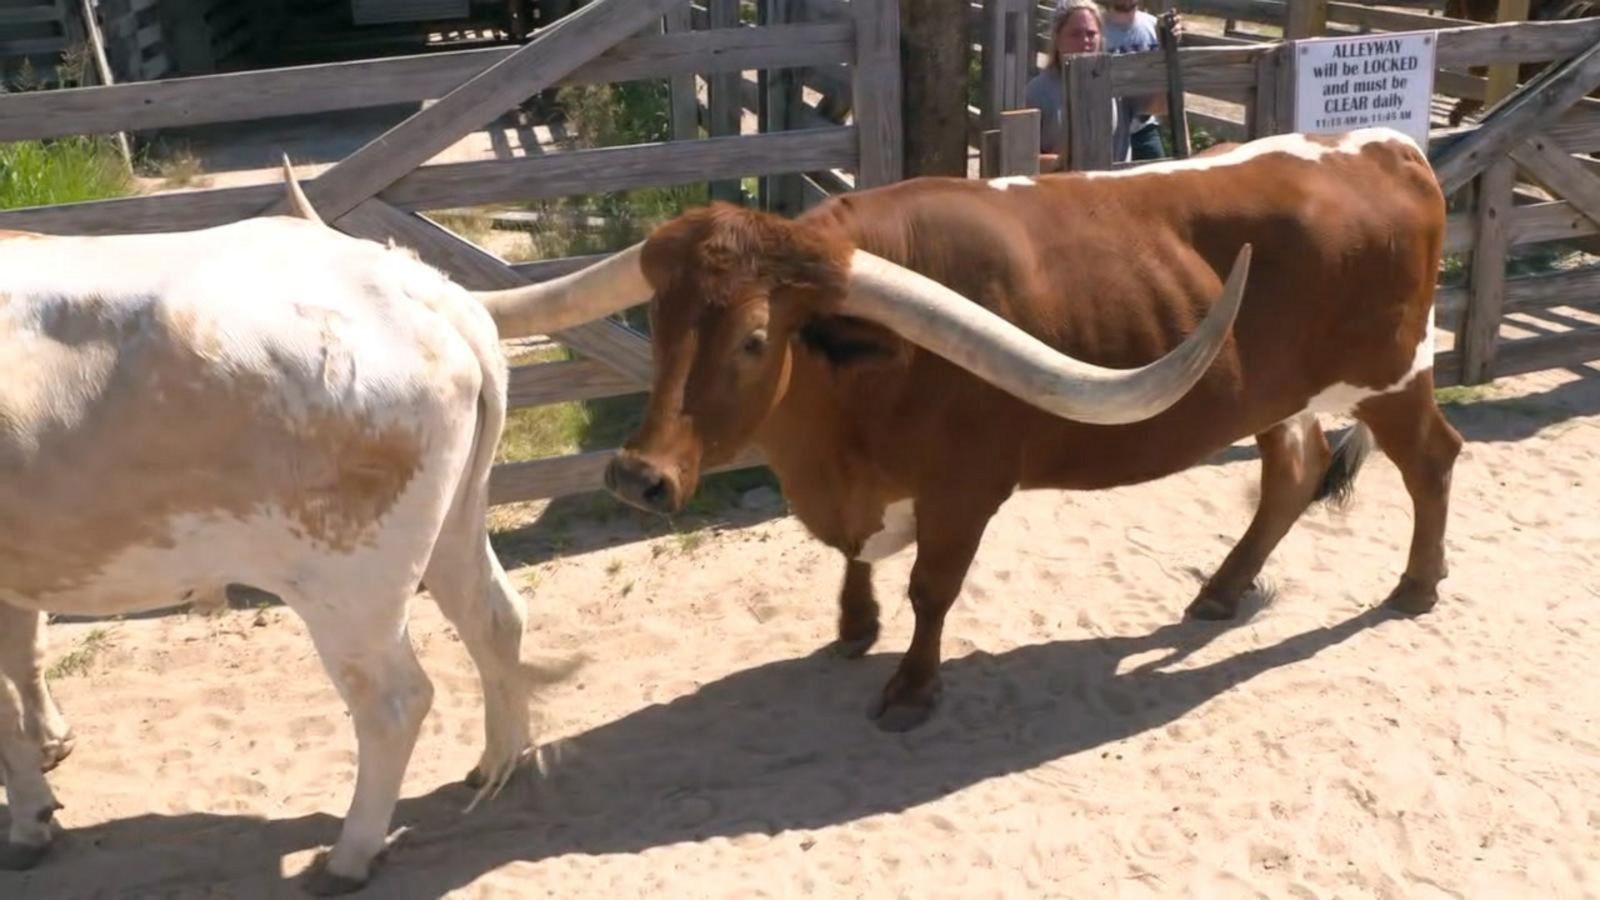 Ever dreamed of driving longhorns through the Fort Worth Stockyards? This  job is for you